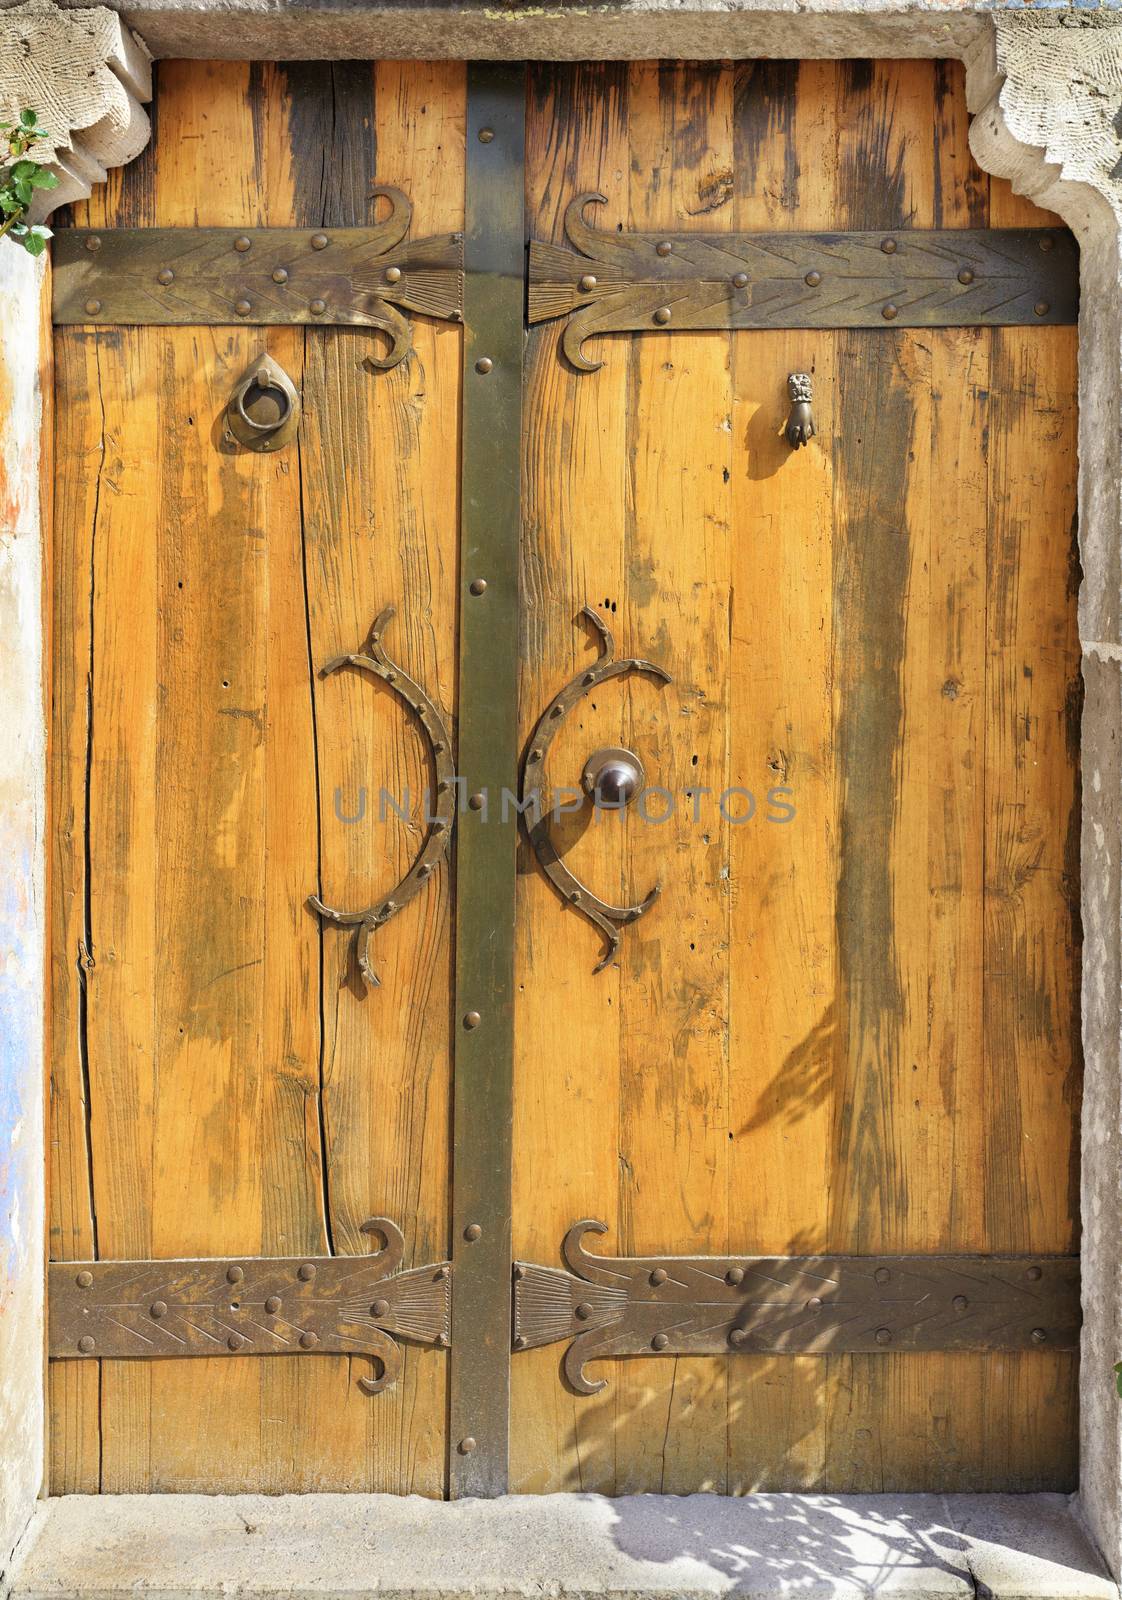 Antique massive wooden doors with wrought handles, rivets and crossbars illuminated by bright sunshine.